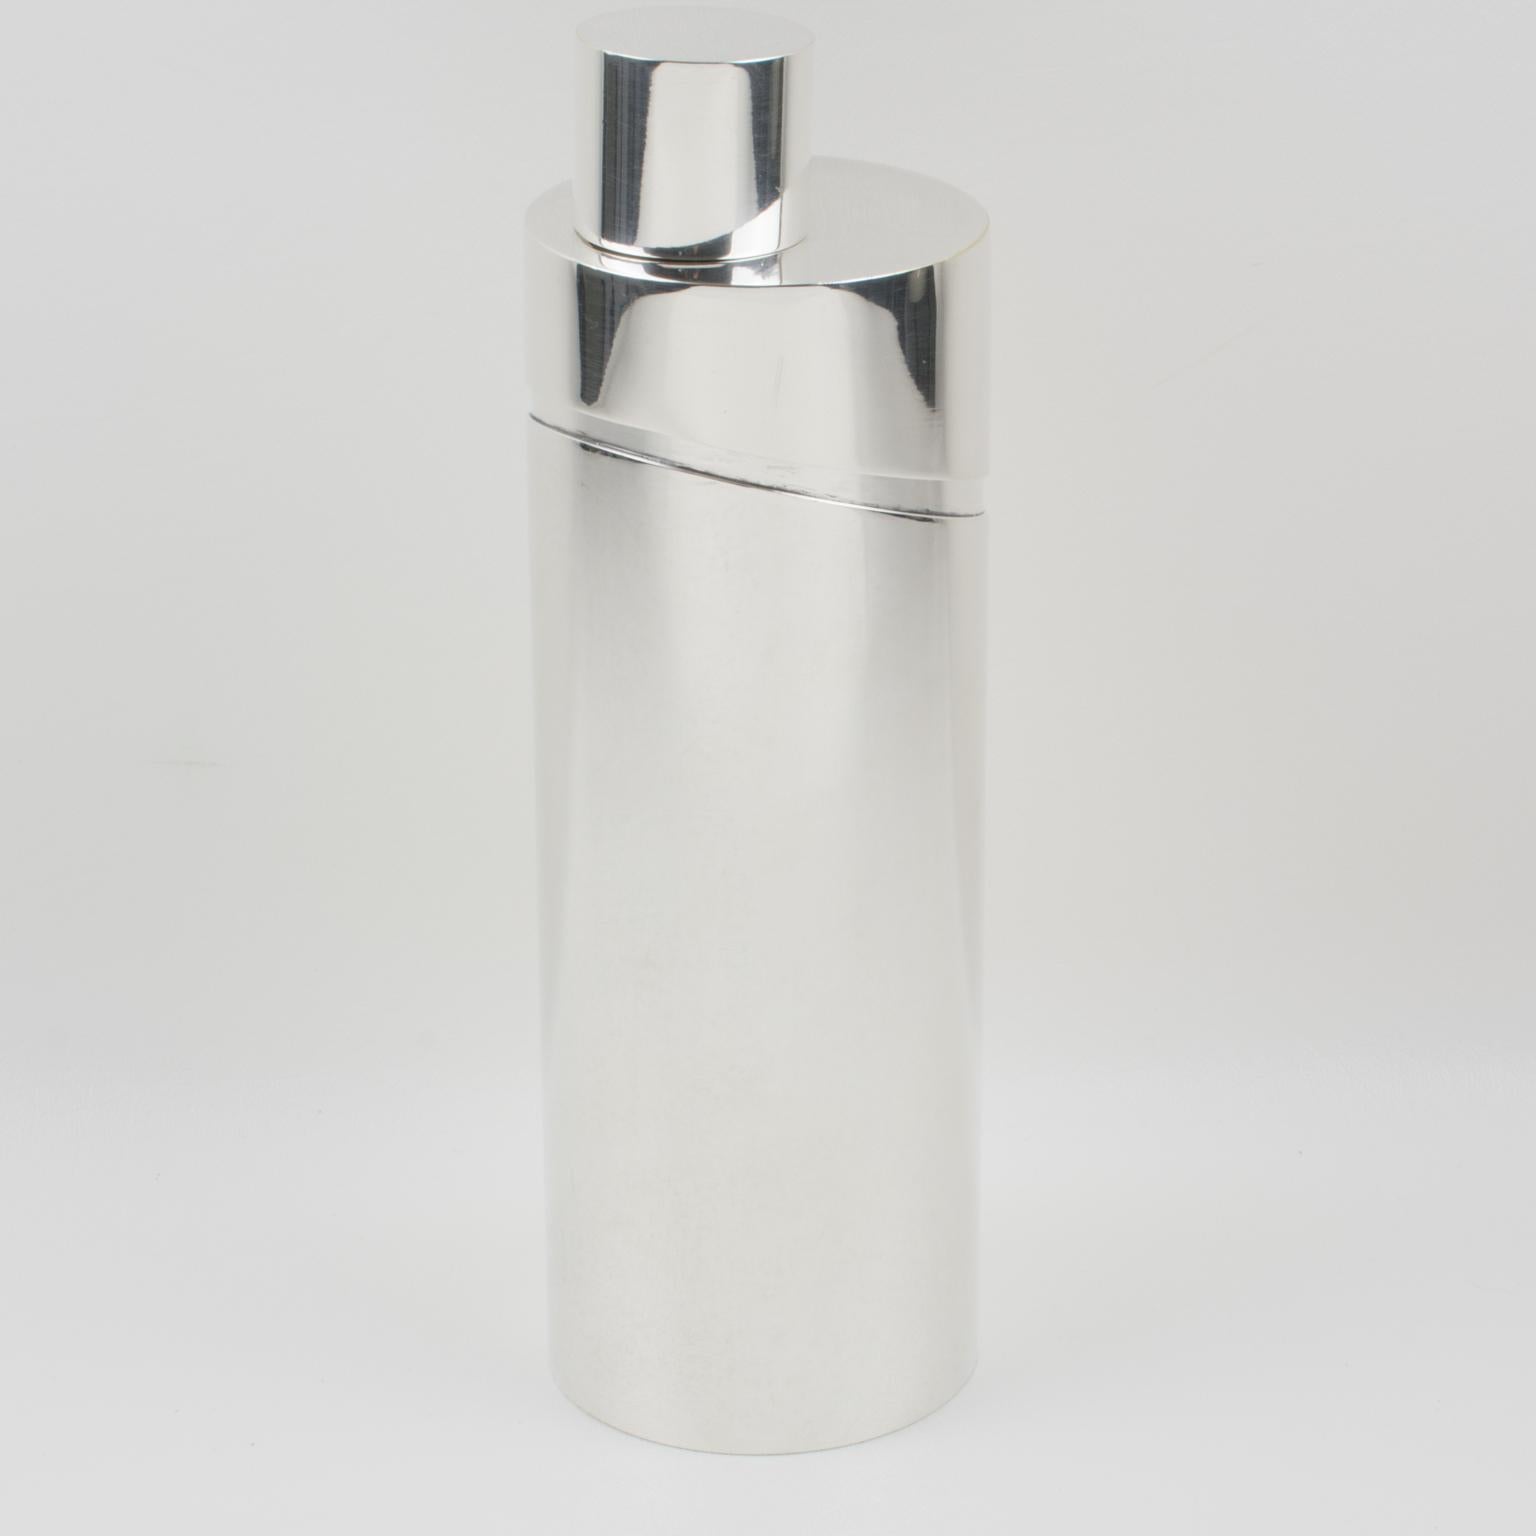 Modernist silver plate cylindrical cocktail or Martini Shaker designed by Lino Sabattini for Christofle, France for its 